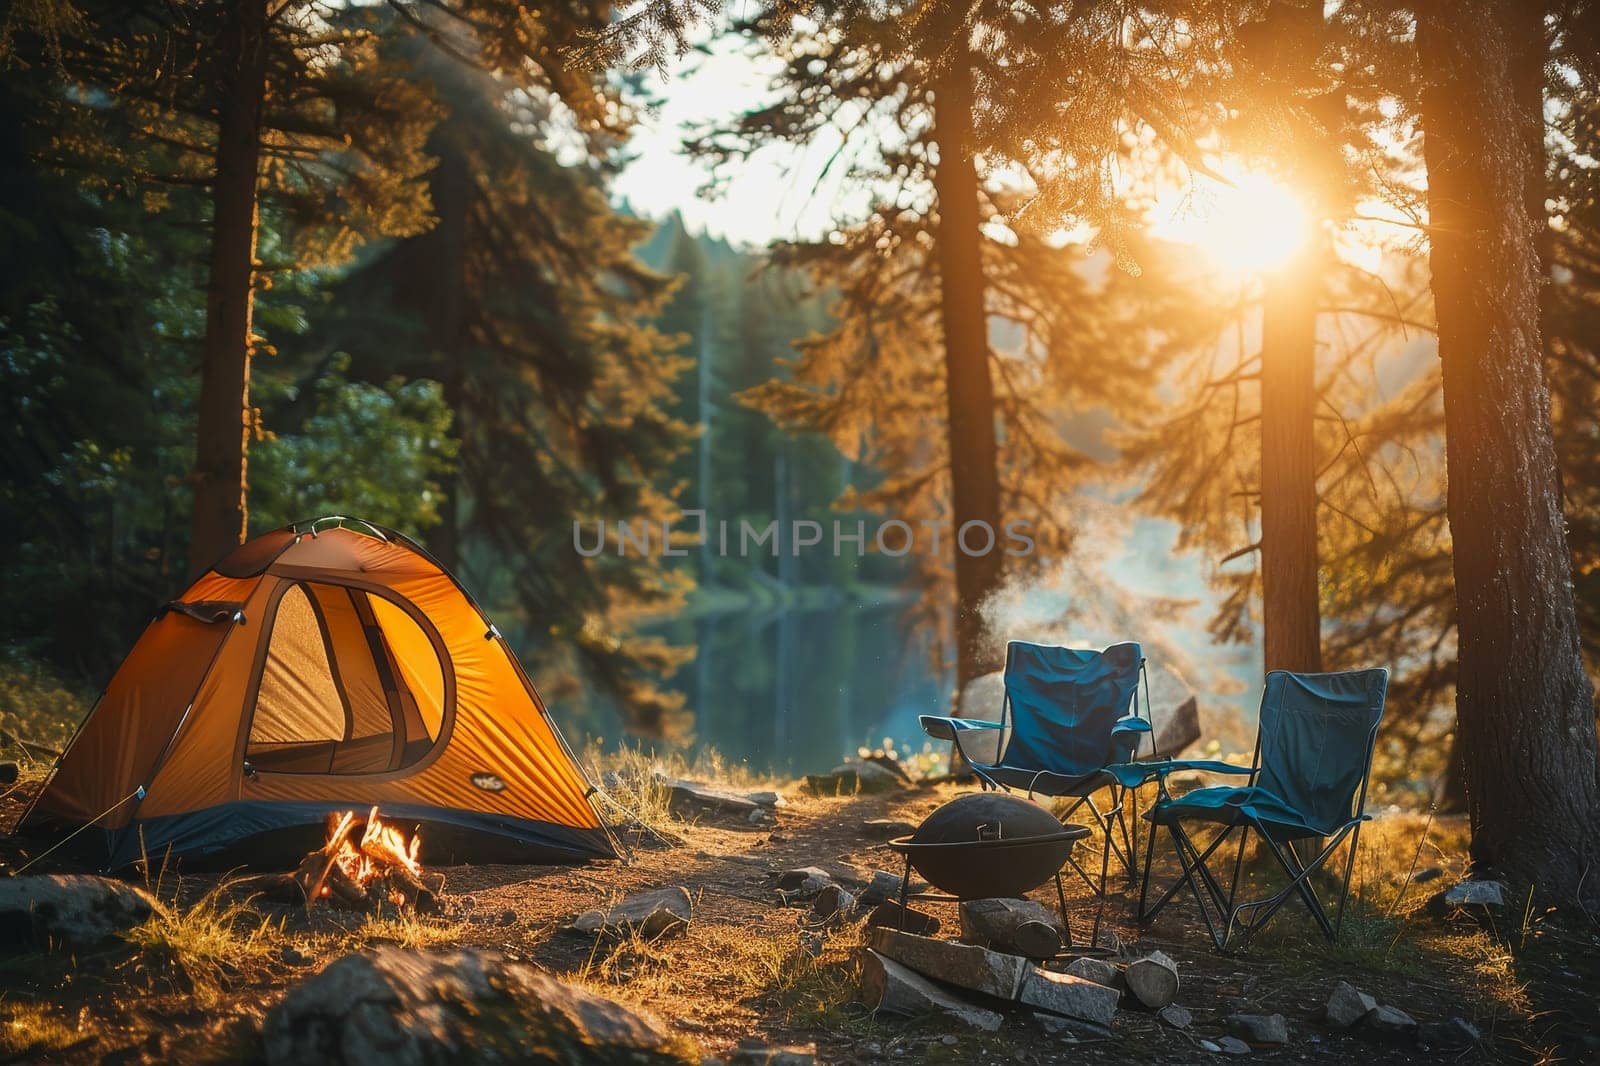 Camping outdoors with lots of sunlight. tent, chairs, a tent BBQ rack, and more by Manastrong